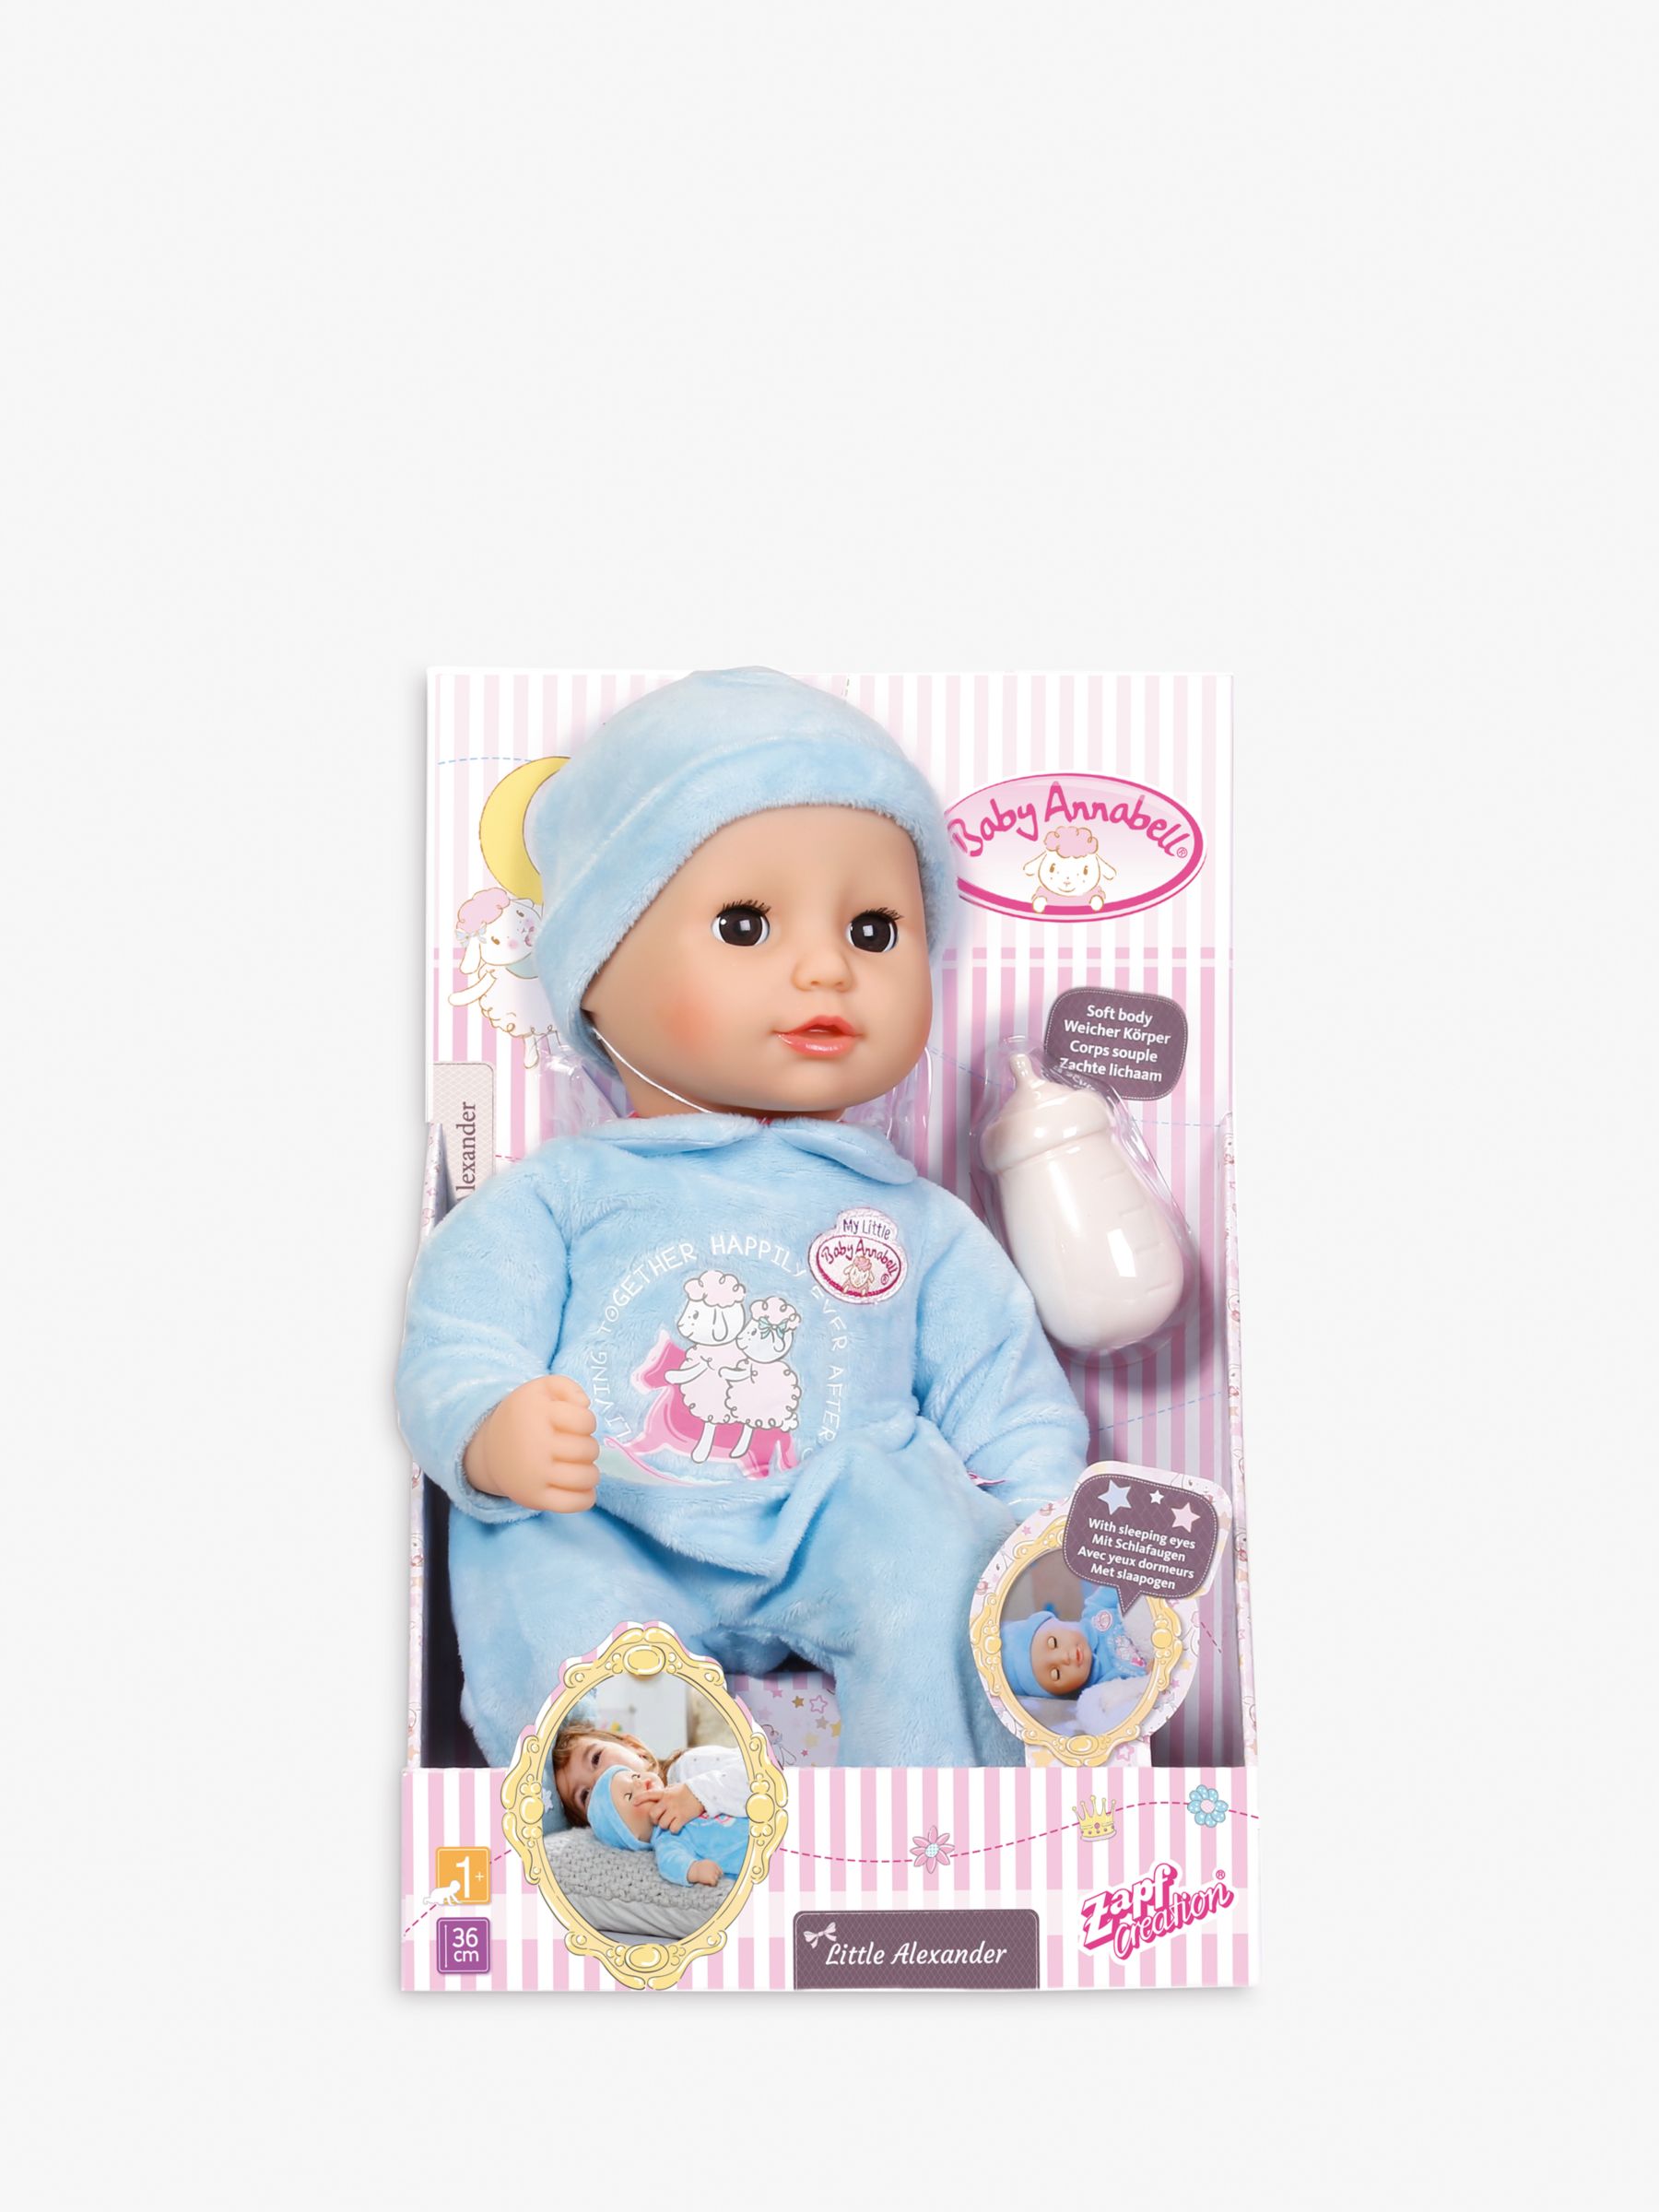 baby annabell brother doll alexander